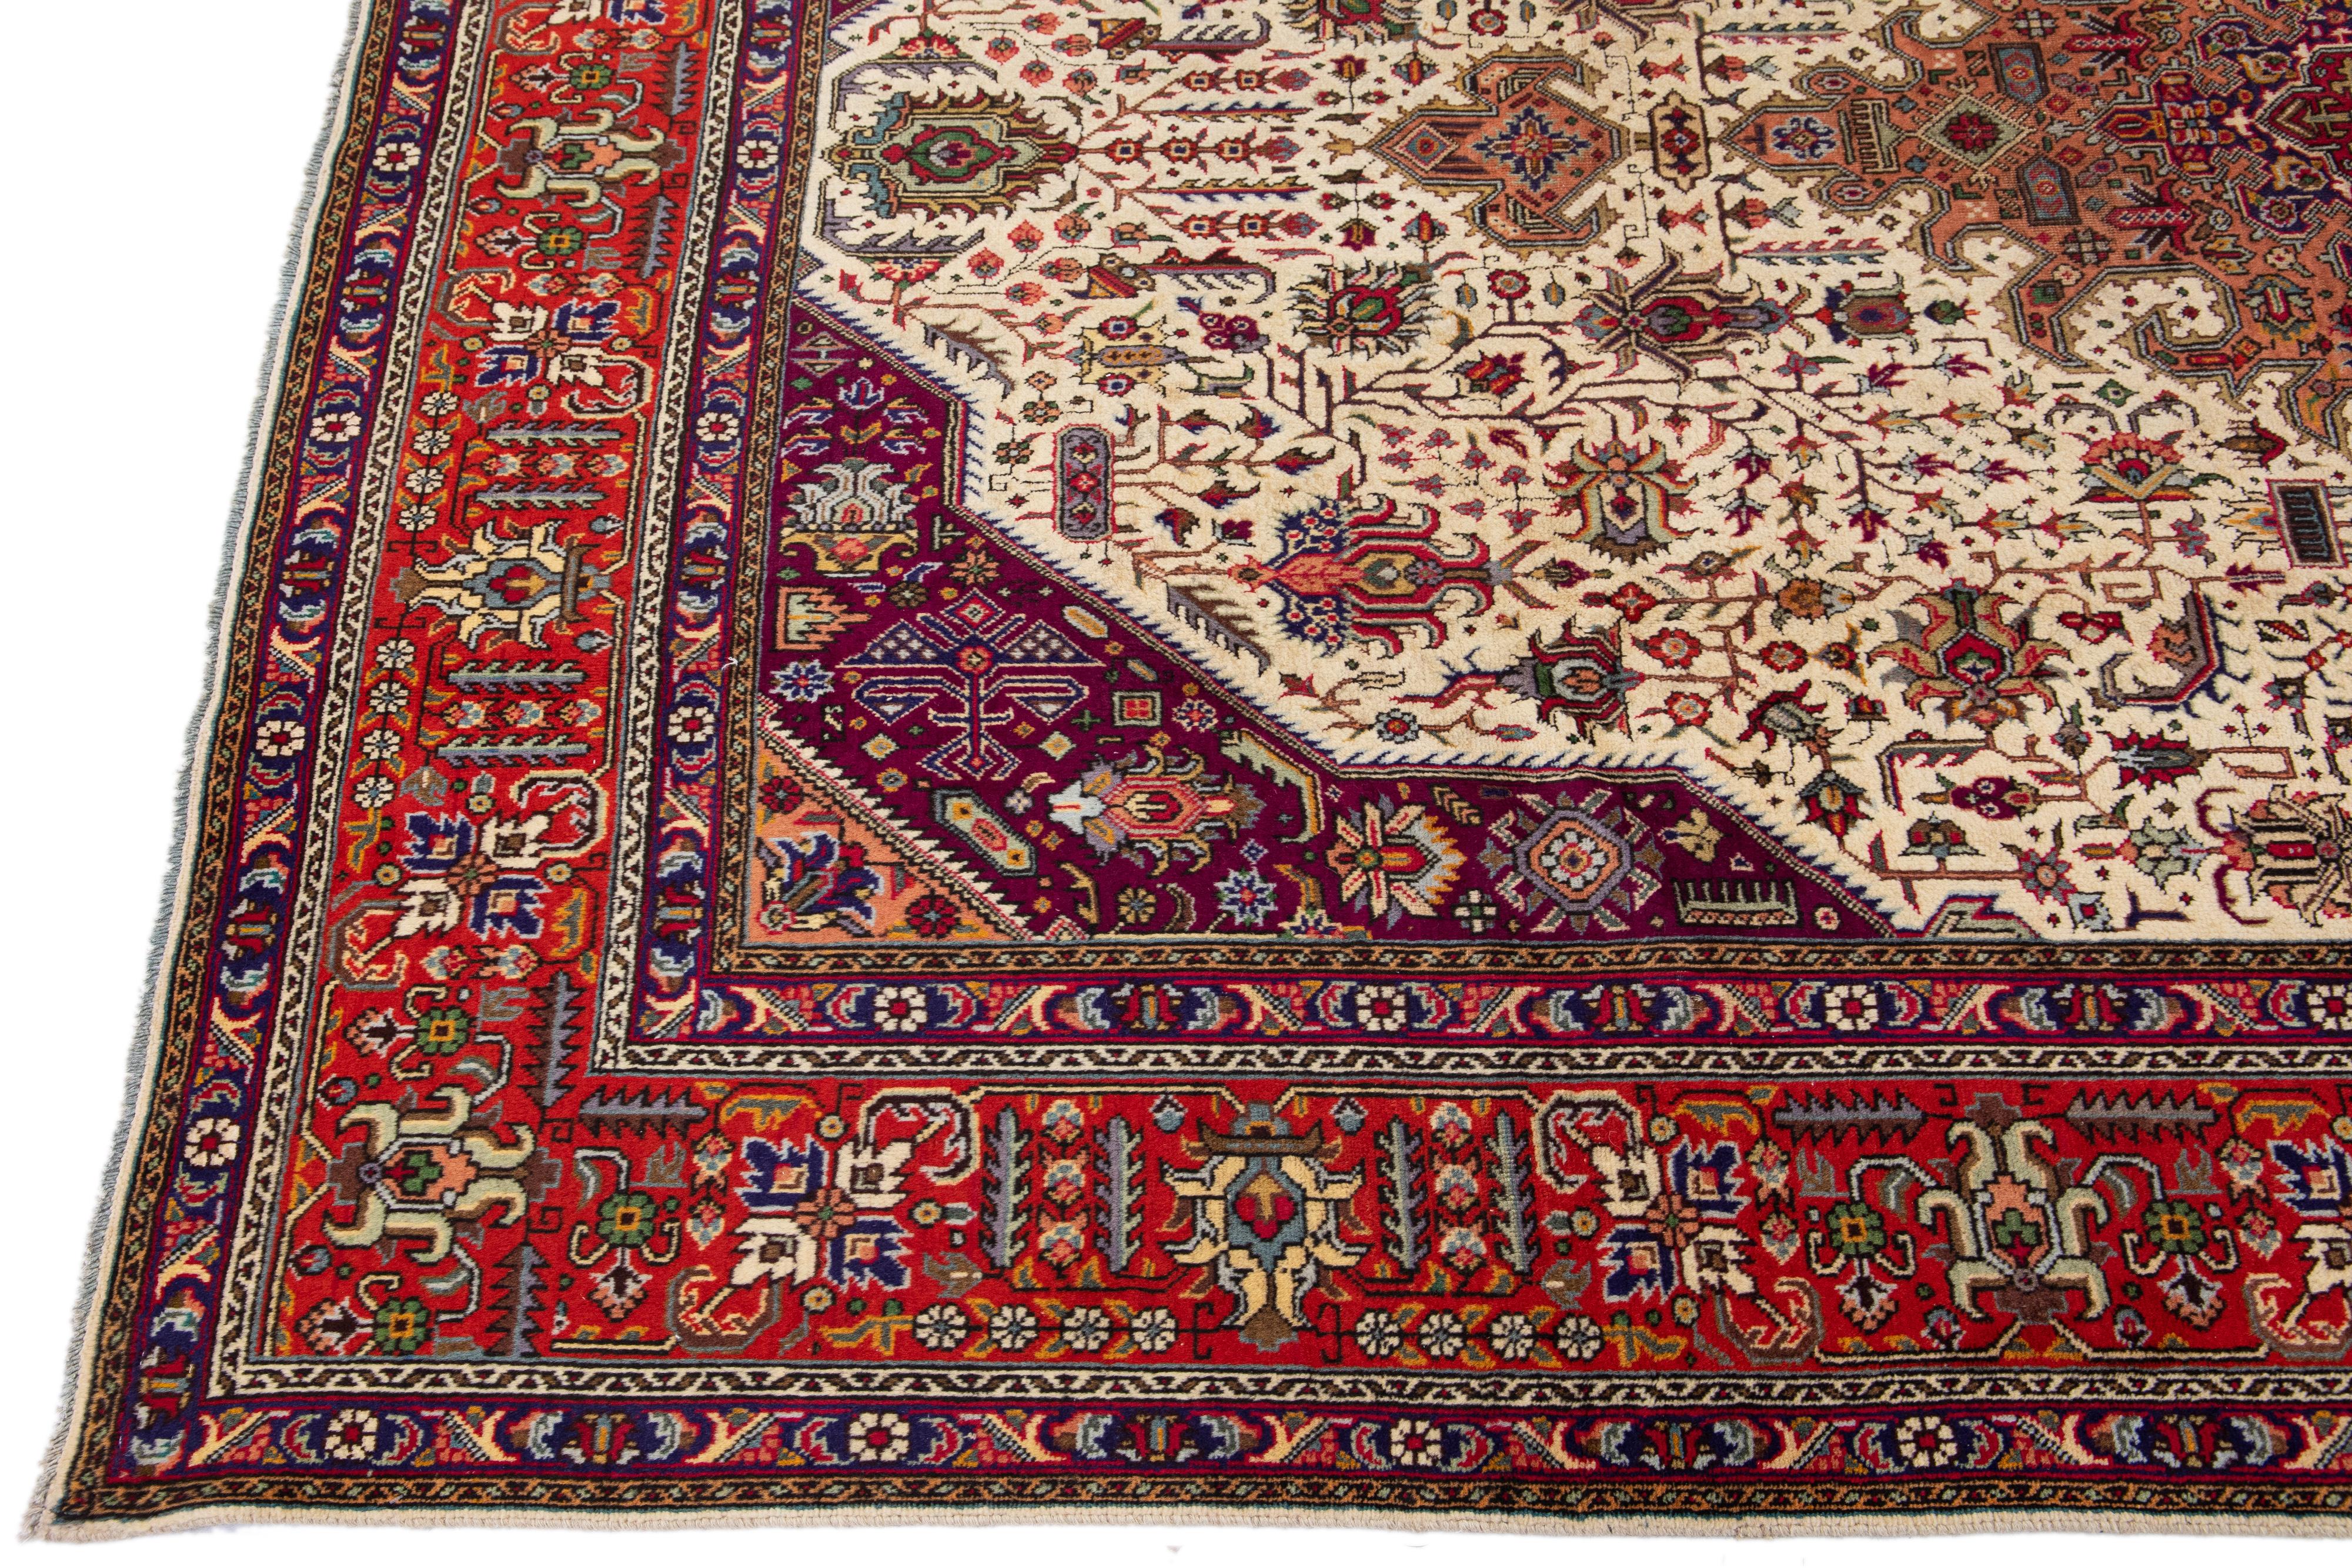 Antique Tabriz Handmade Allover Designed Beige & Red Persian Wool Rug In Good Condition For Sale In Norwalk, CT